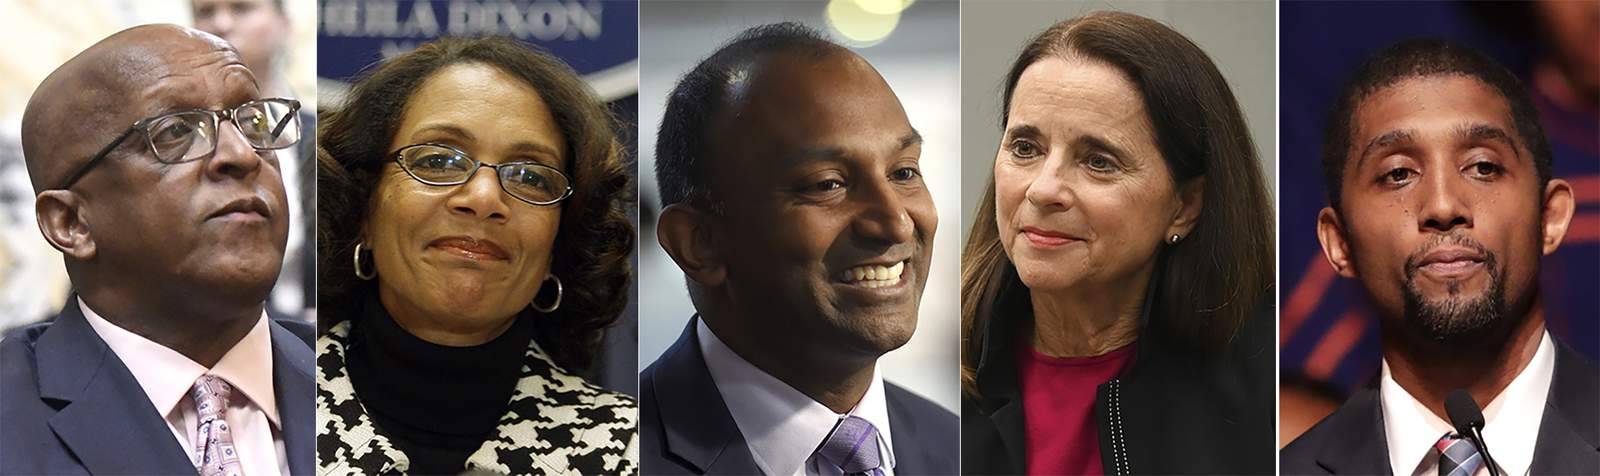 Democratic Baltimore mayoral race too close to call